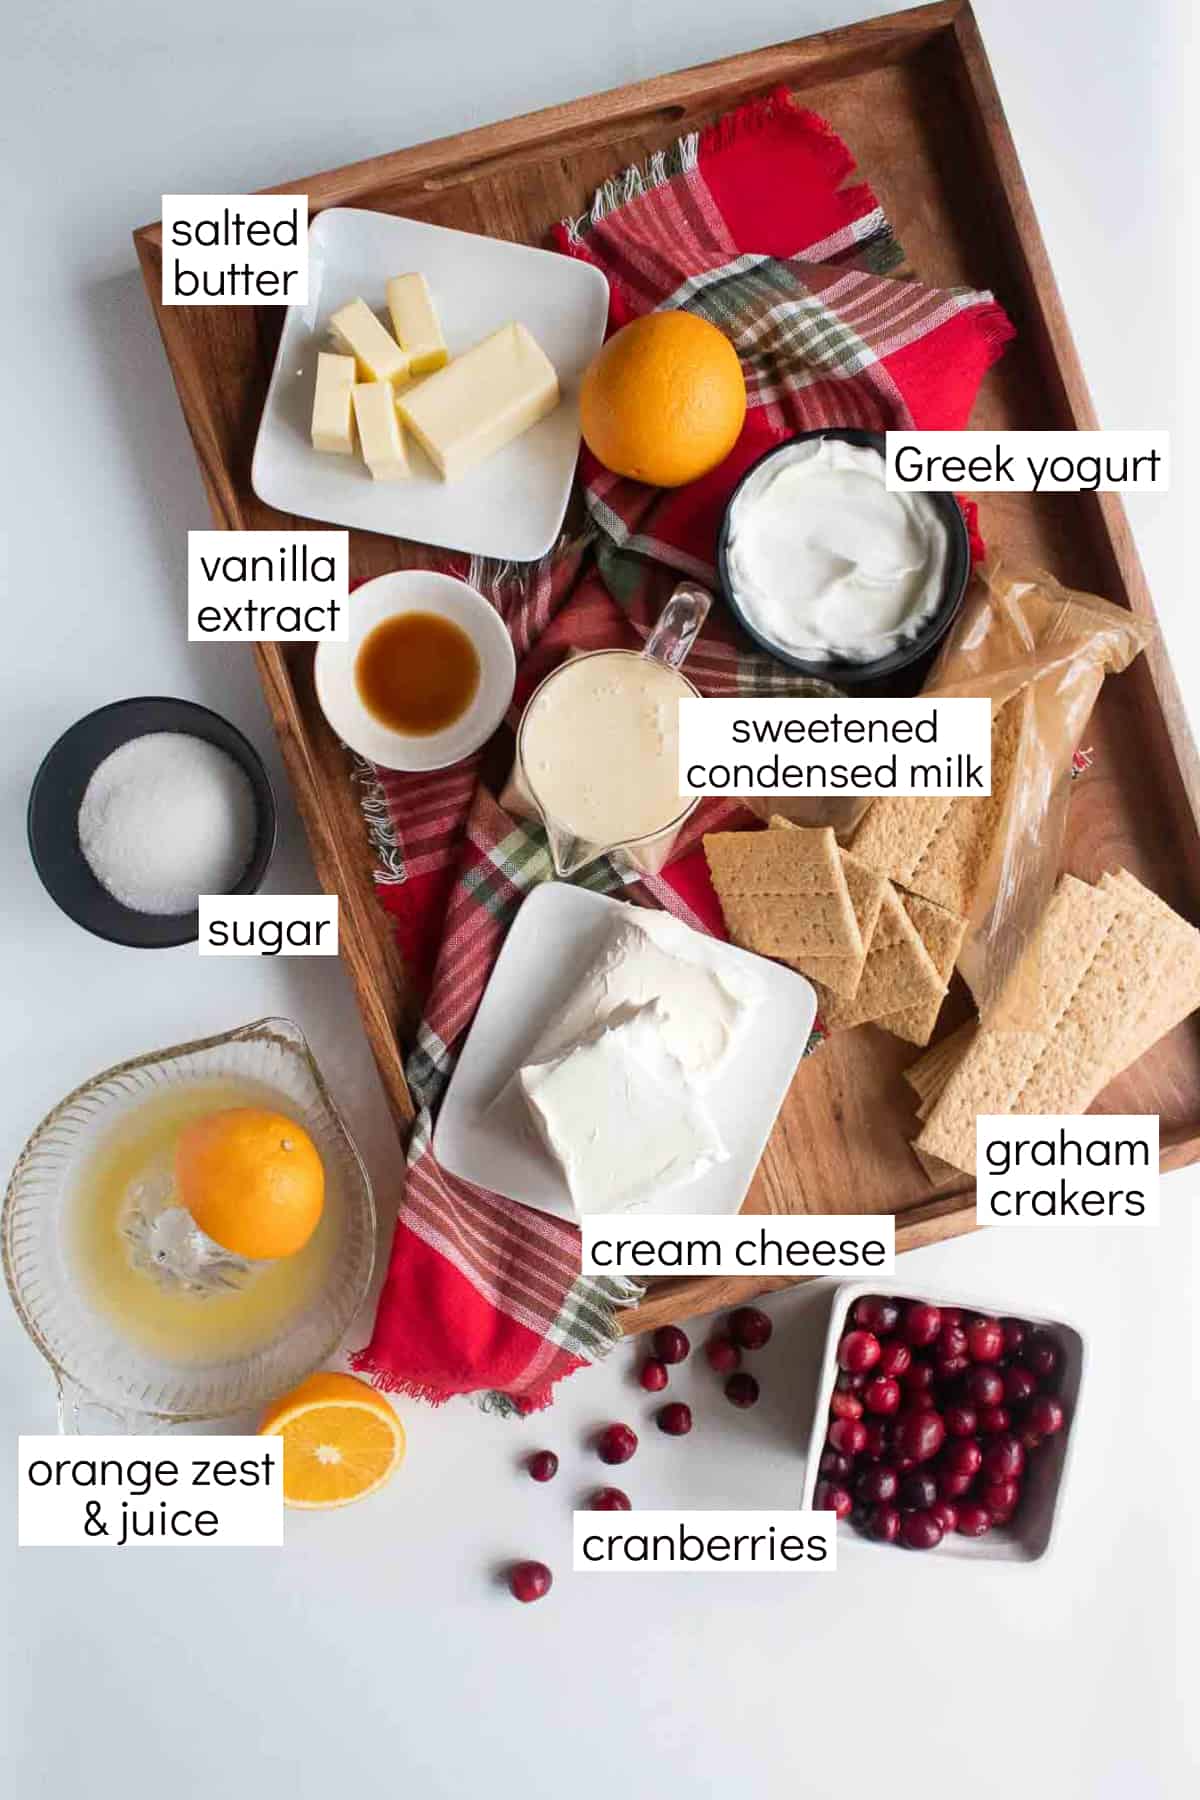 Ingredients for cranberry cheesecake bars with orange cranberry swirl arranged on a wood tray. Text labels in white boxes include: salted butter, vanilla extract, Greek yogurt, sweetened condensed milk, sugar, cream cheese, graham crackers, orange zest & juice, and cranberries.